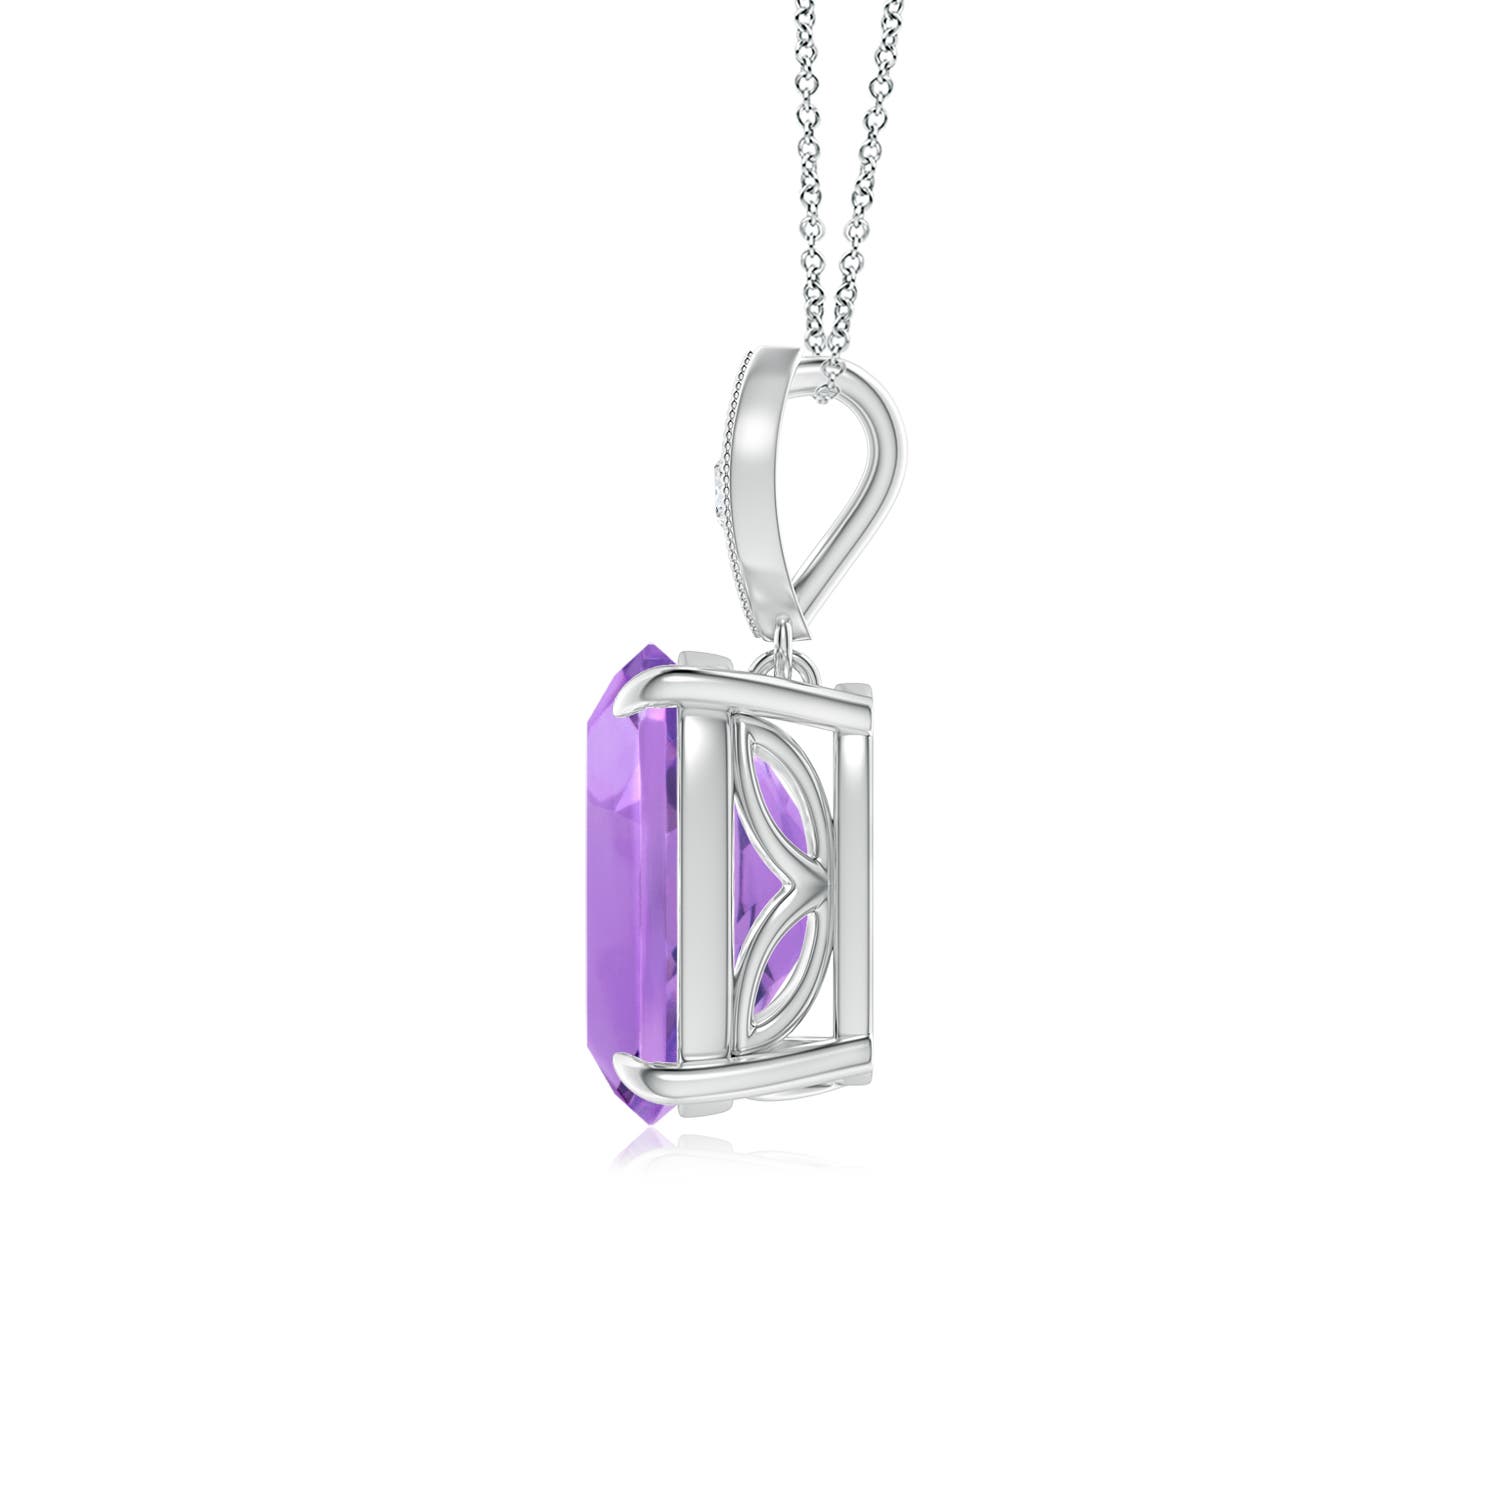 A - Amethyst / 2.03 CT / 14 KT White Gold